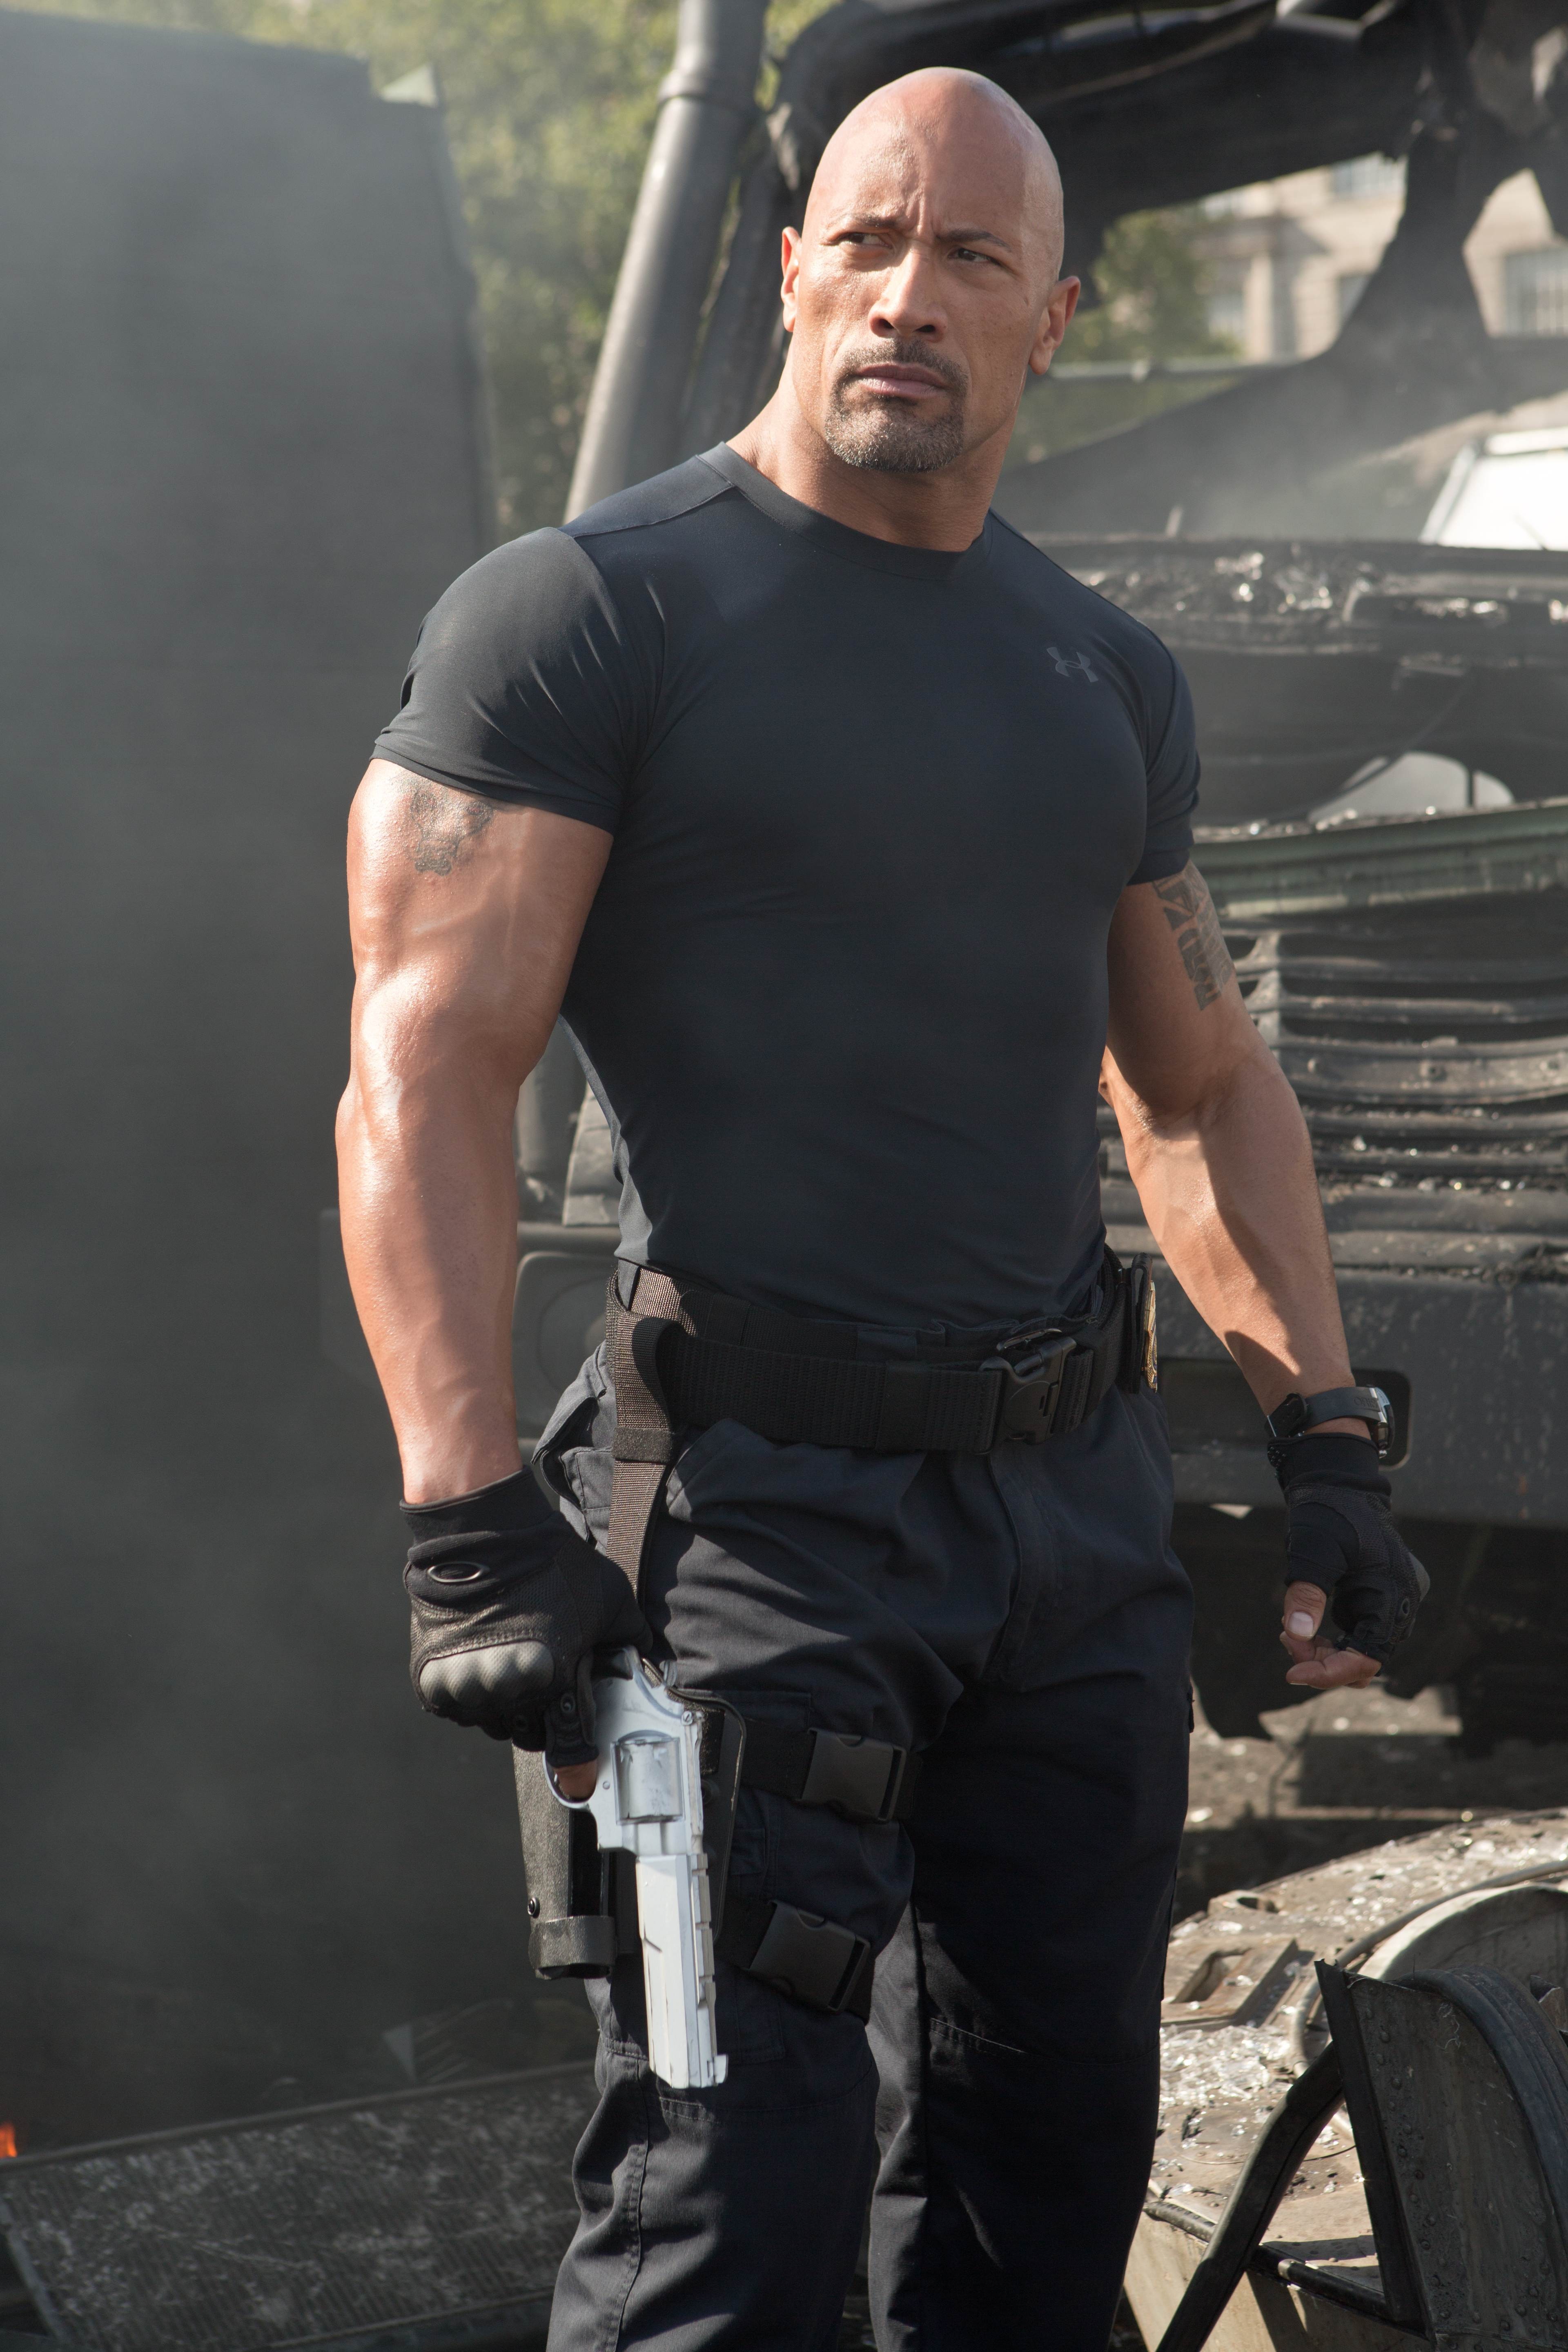 People 3840x5760 Fast and Furious Dwayne Johnson movies muscles muscular film stills actor celebrity inked men men